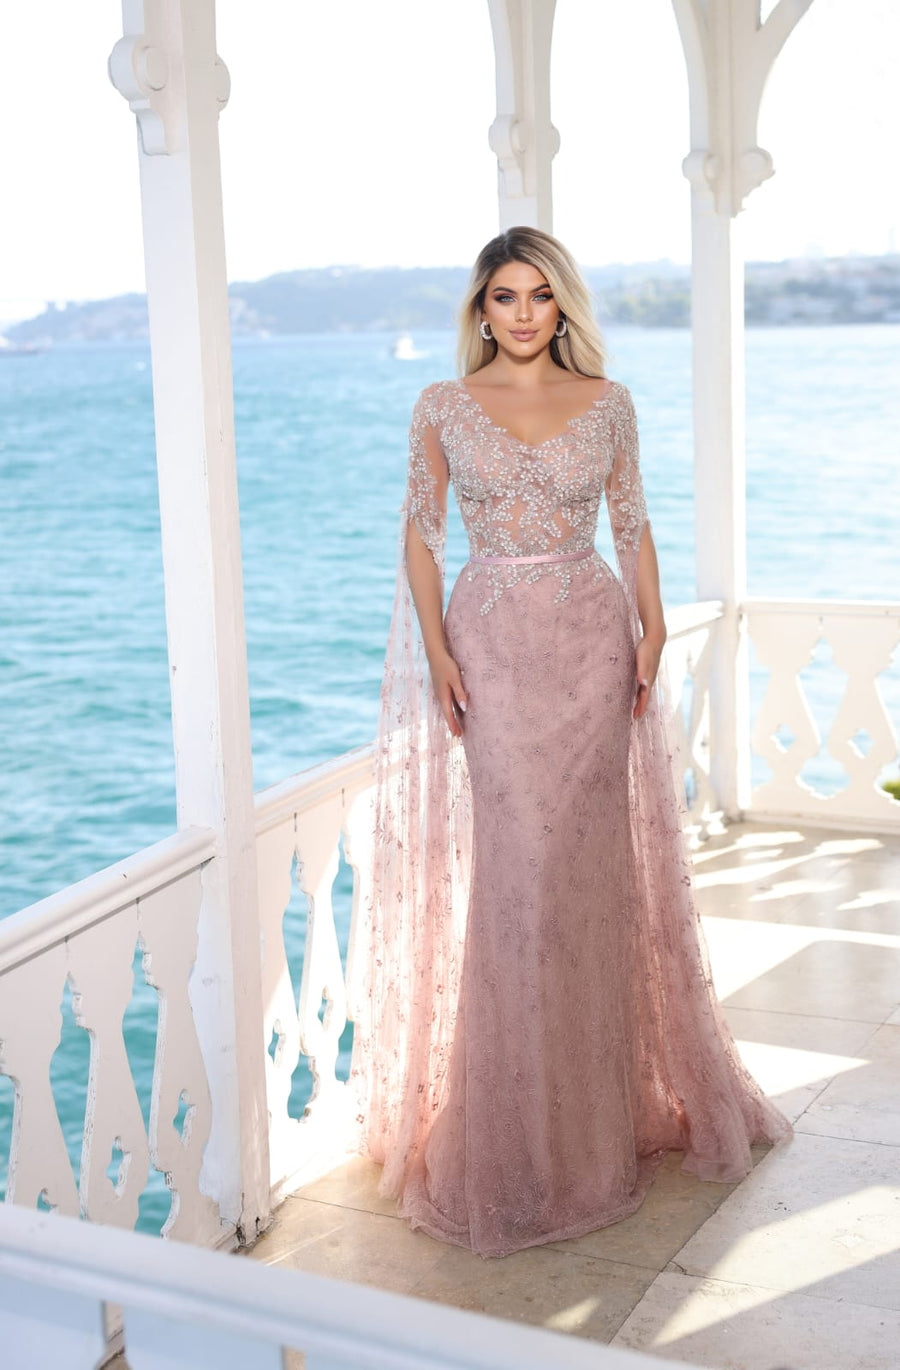 BEADED LACE GOWN WITH LONG LACE SLEEVE FEATURE